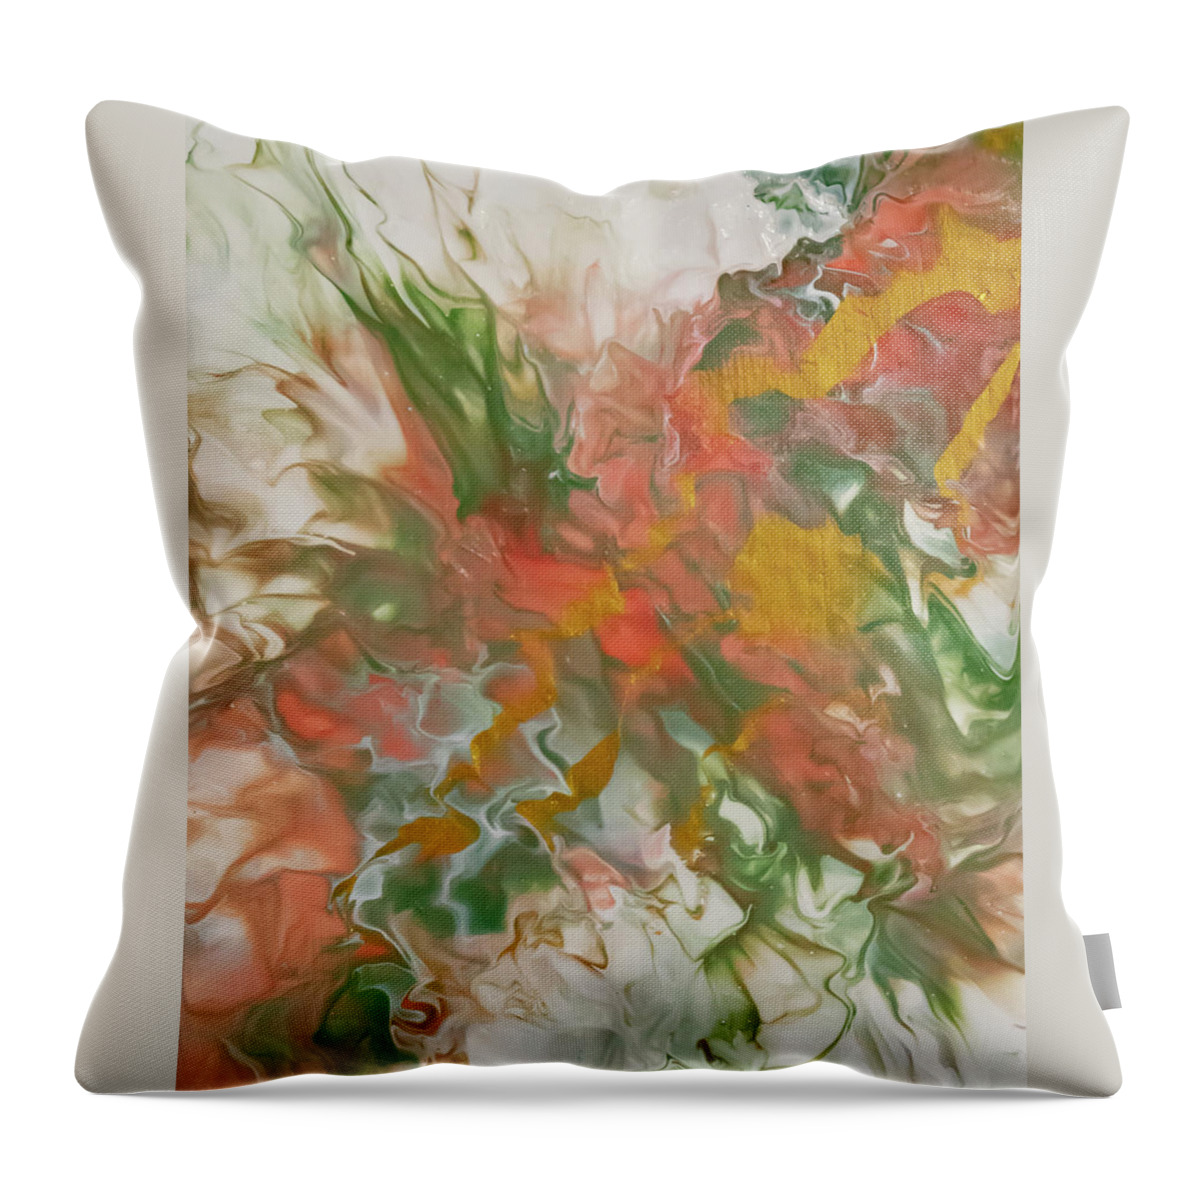 Pour Throw Pillow featuring the mixed media Coral 2 by Aimee Bruno